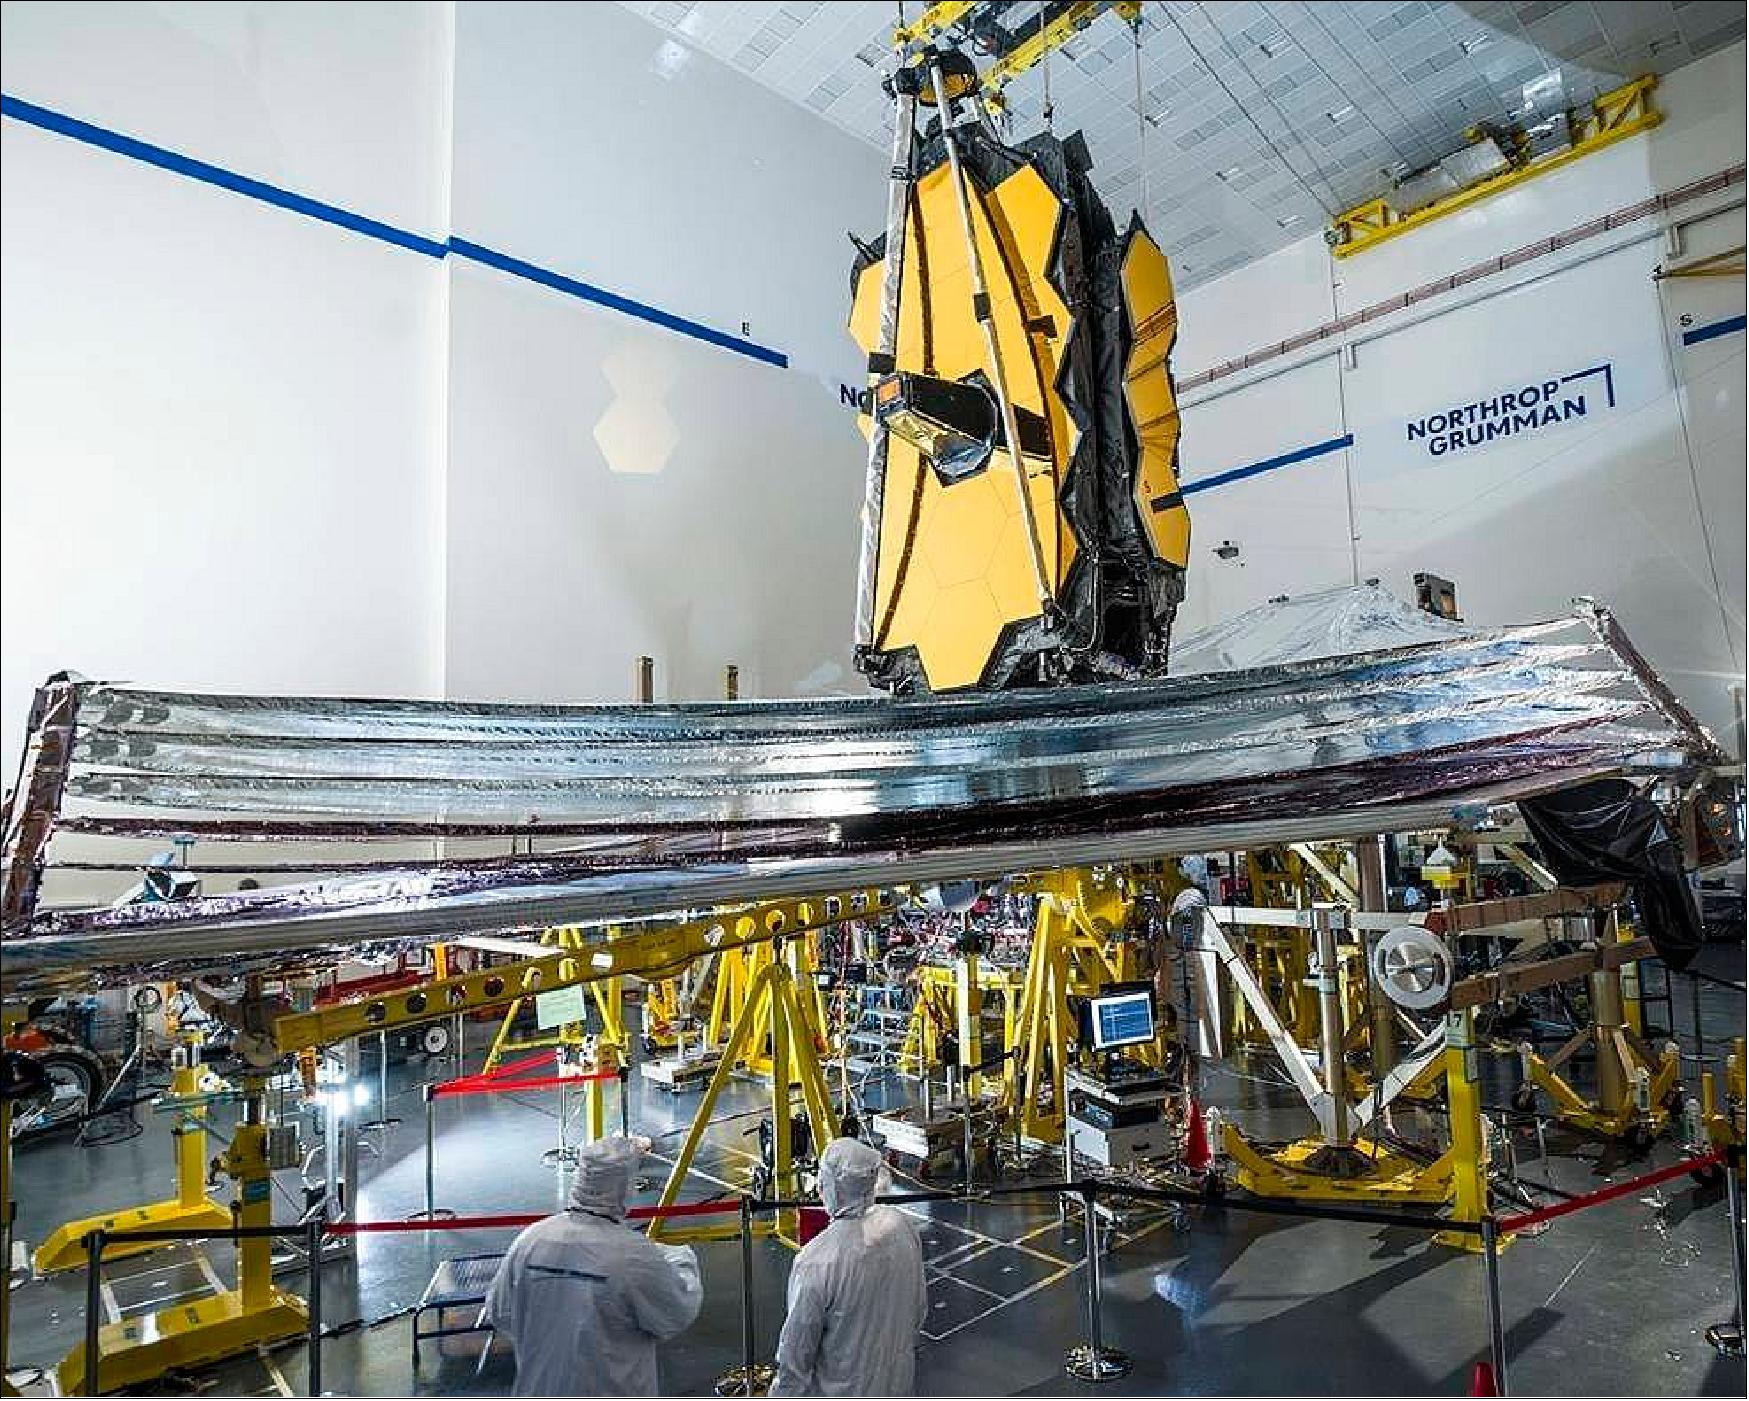 Figure 38: On Jan. 4, 2022, engineers successfully completed the deployment of the James Webb Space Telescope's sunshield, seen here during its final deployment test on Earth in December 2020 at Northrop Grumman in Redondo Beach, California. The five-layer, tennis court-sized sunshield is essential for protecting the telescope from heat, allowing Webb's instruments to cool down to the extremely low temperatures necessary to carry out its science goals (image credits: NASA/Chris Gunn)